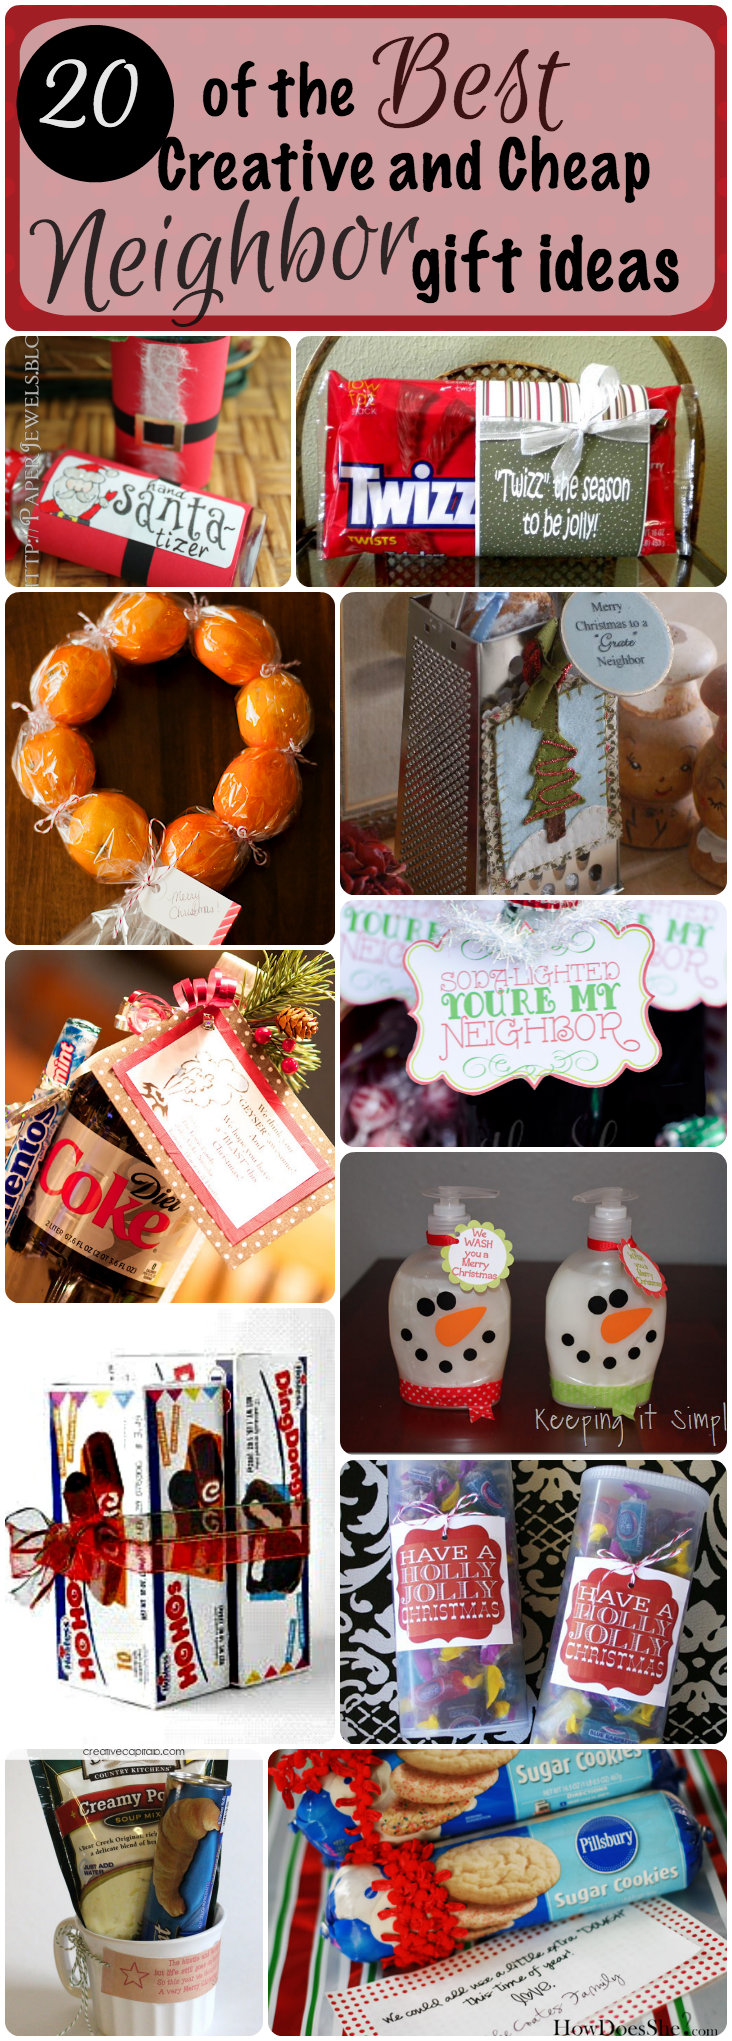 Wondering what to buy the neighbors this year that’s cute, creative and won’t bust your budget? I got you covered!